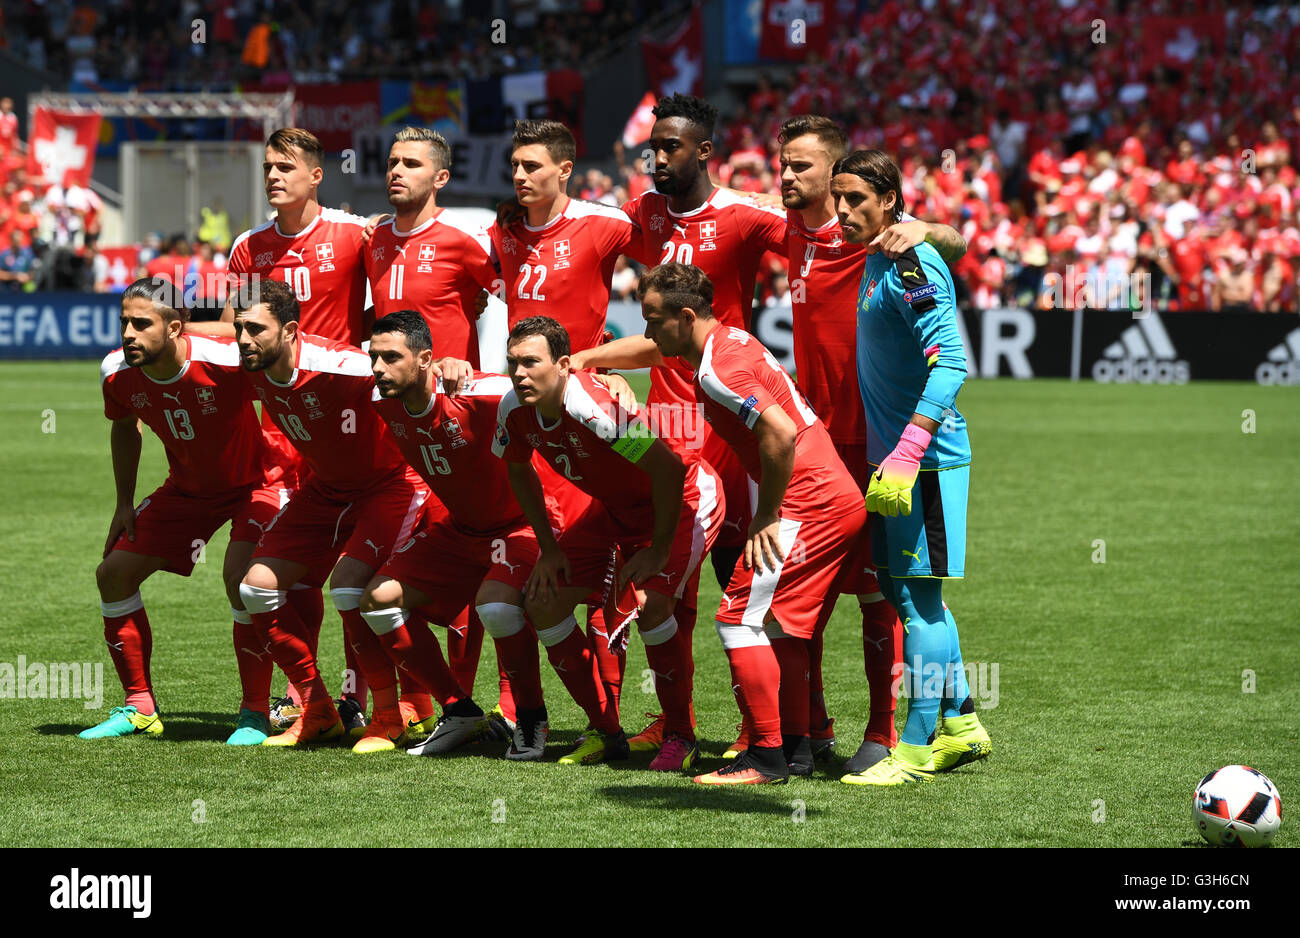 Saint-Etienne, France. 25th June, 2016. Players of team of Switzerland pose  for photographers before the UEFA EURO 2016 Round of 16 soccer match  between Switzerland and Poland at the Geoffroy Guichard stadium